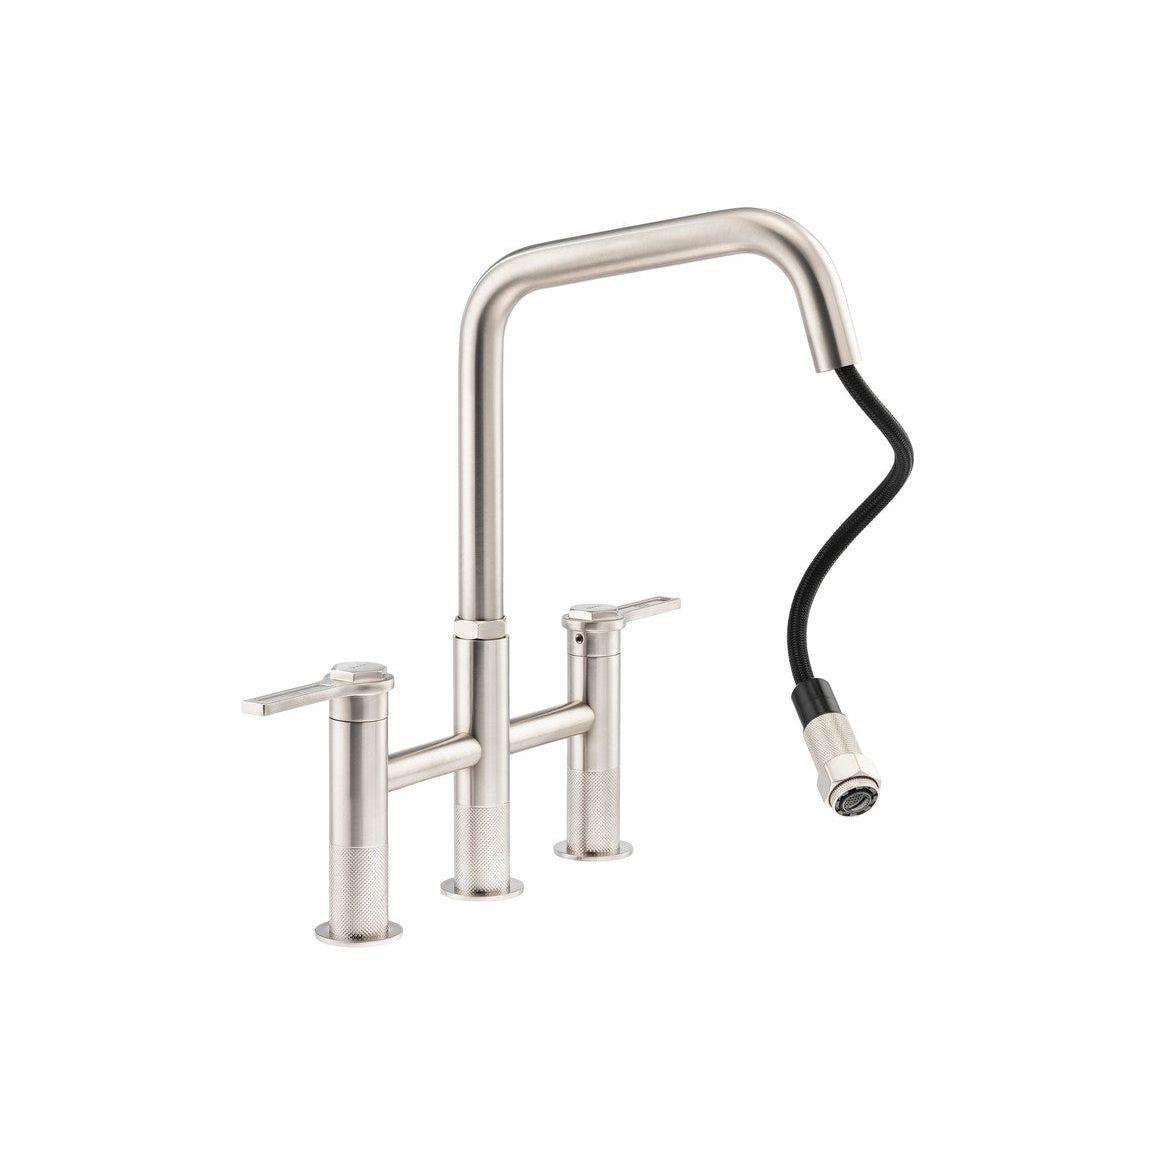 Abode Hex Bridge Dual Lever Mixer Tap w/Pull Out - Brushed Nickel